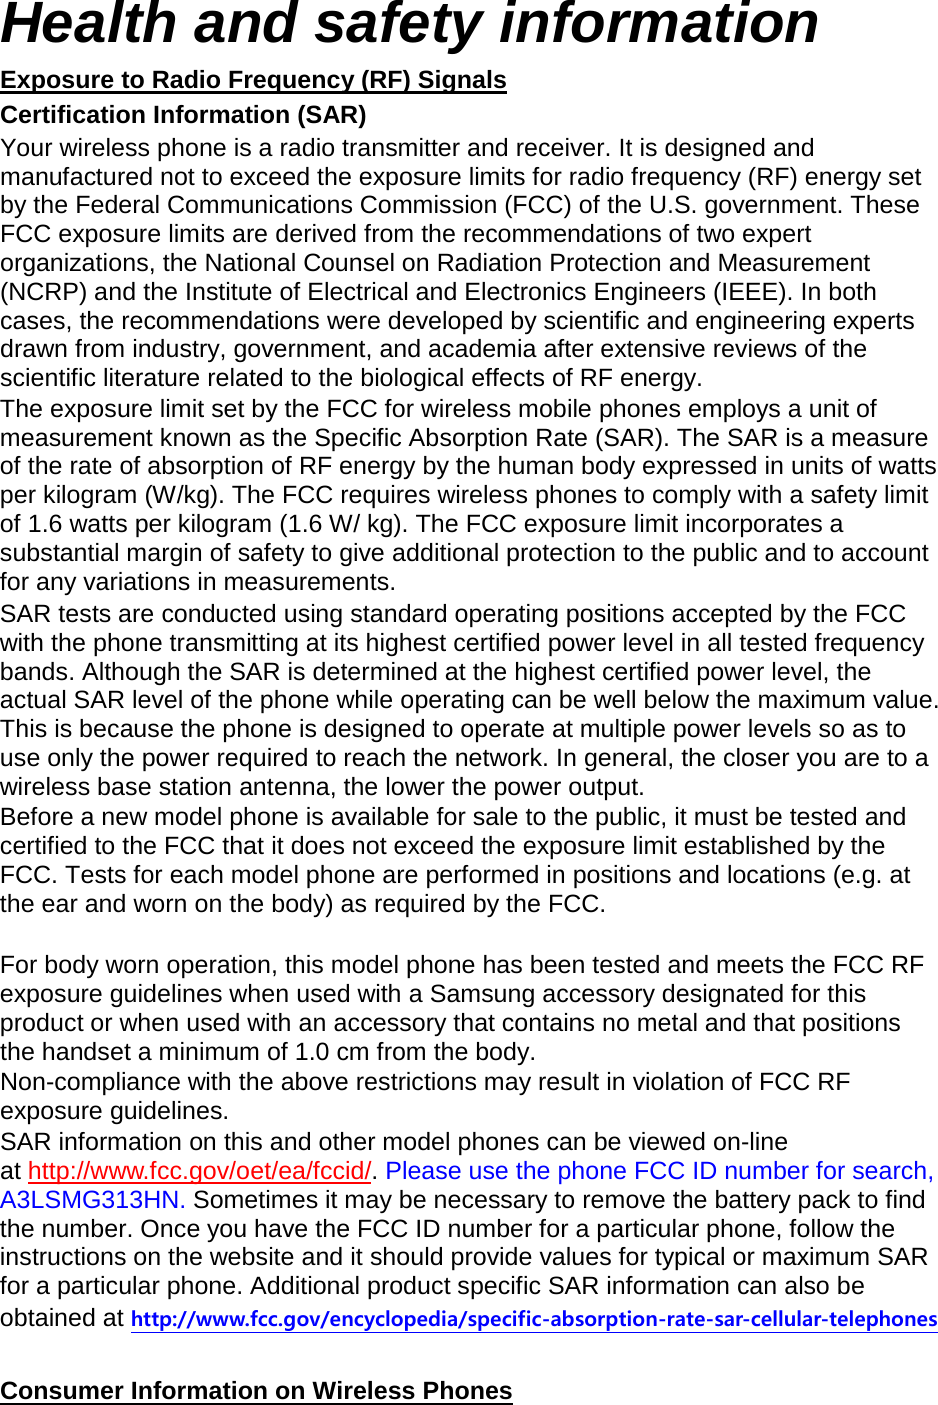 Health and safety information Certification Information (SAR) Exposure to Radio Frequency (RF) Signals Your wireless phone is a radio transmitter and receiver. It is designed and manufactured not to exceed the exposure limits for radio frequency (RF) energy set by the Federal Communications Commission (FCC) of the U.S. government. These FCC exposure limits are derived from the recommendations of two expert organizations, the National Counsel on Radiation Protection and Measurement (NCRP) and the Institute of Electrical and Electronics Engineers (IEEE). In both cases, the recommendations were developed by scientific and engineering experts drawn from industry, government, and academia after extensive reviews of the scientific literature related to the biological effects of RF energy. The exposure limit set by the FCC for wireless mobile phones employs a unit of measurement known as the Specific Absorption Rate (SAR). The SAR is a measure of the rate of absorption of RF energy by the human body expressed in units of watts per kilogram (W/kg). The FCC requires wireless phones to comply with a safety limit of 1.6 watts per kilogram (1.6 W/ kg). The FCC exposure limit incorporates a substantial margin of safety to give additional protection to the public and to account for any variations in measurements. SAR tests are conducted using standard operating positions accepted by the FCC with the phone transmitting at its highest certified power level in all tested frequency bands. Although the SAR is determined at the highest certified power level, the actual SAR level of the phone while operating can be well below the maximum value. This is because the phone is designed to operate at multiple power levels so as to use only the power required to reach the network. In general, the closer you are to a wireless base station antenna, the lower the power output. Before a new model phone is available for sale to the public, it must be tested and certified to the FCC that it does not exceed the exposure limit established by the FCC. Tests for each model phone are performed in positions and locations (e.g. at the ear and worn on the body) as required by the FCC.      For body worn operation, this model phone has been tested and meets the FCC RF exposure guidelines when used with a Samsung accessory designated for this product or when used with an accessory that contains no metal and that positions the handset a minimum of 1.0 cm from the body.   Non-compliance with the above restrictions may result in violation of FCC RF exposure guidelines. SAR information on this and other model phones can be viewed on-line at http://www.fcc.gov/oet/ea/fccid/. Please use the phone FCC ID number for search, A3LSMG313HN. Sometimes it may be necessary to remove the battery pack to find the number. Once you have the FCC ID number for a particular phone, follow the instructions on the website and it should provide values for typical or maximum SAR for a particular phone. Additional product specific SAR information can also be obtained at http://www.fcc.gov/encyclopedia/specific-absorption-rate-sar-cellular-telephones  Consumer Information on Wireless Phones 